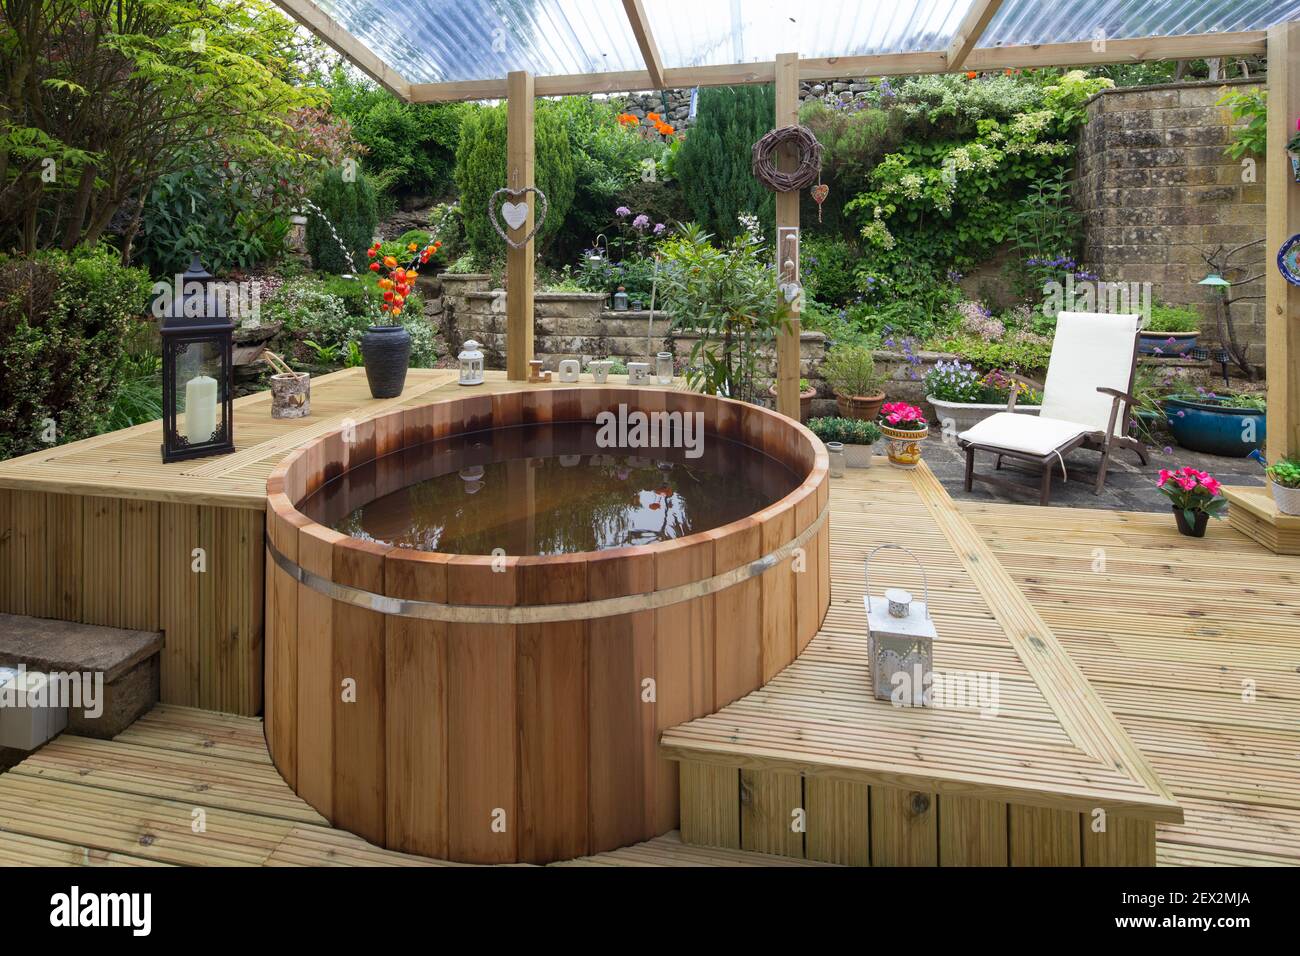 Wooden hot tub on outside decking area Stock Photo